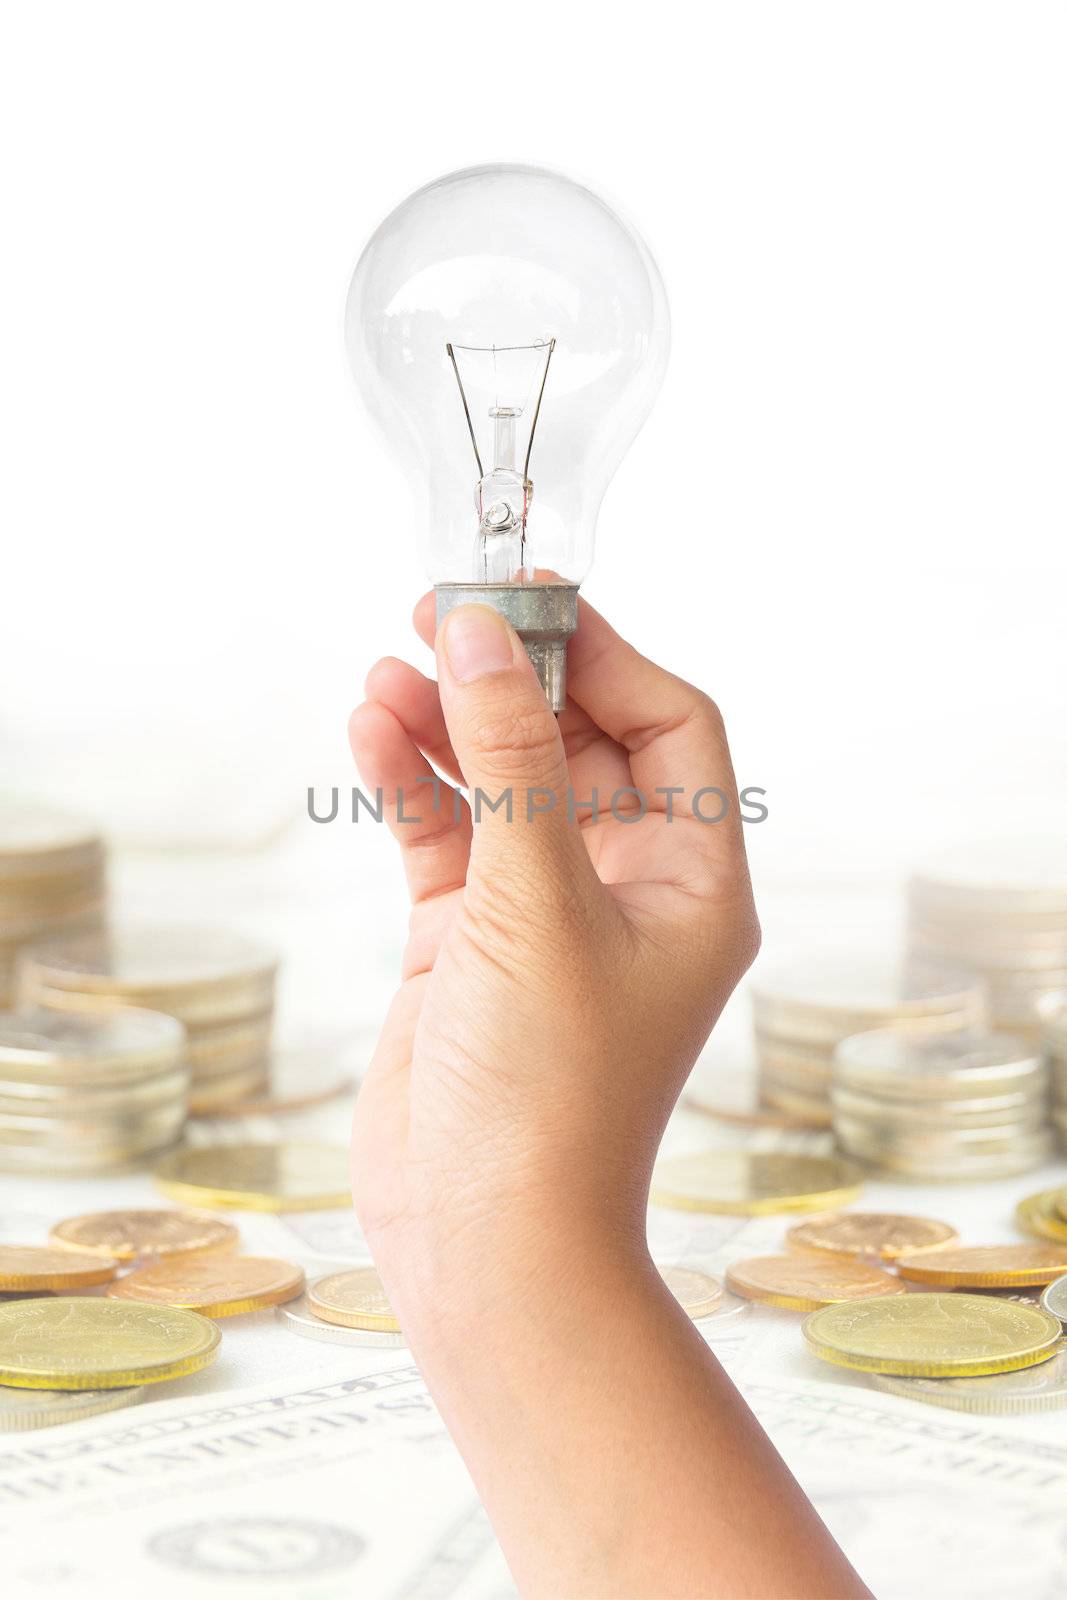 light blub in hand,save money concept







light blub in hand with money background